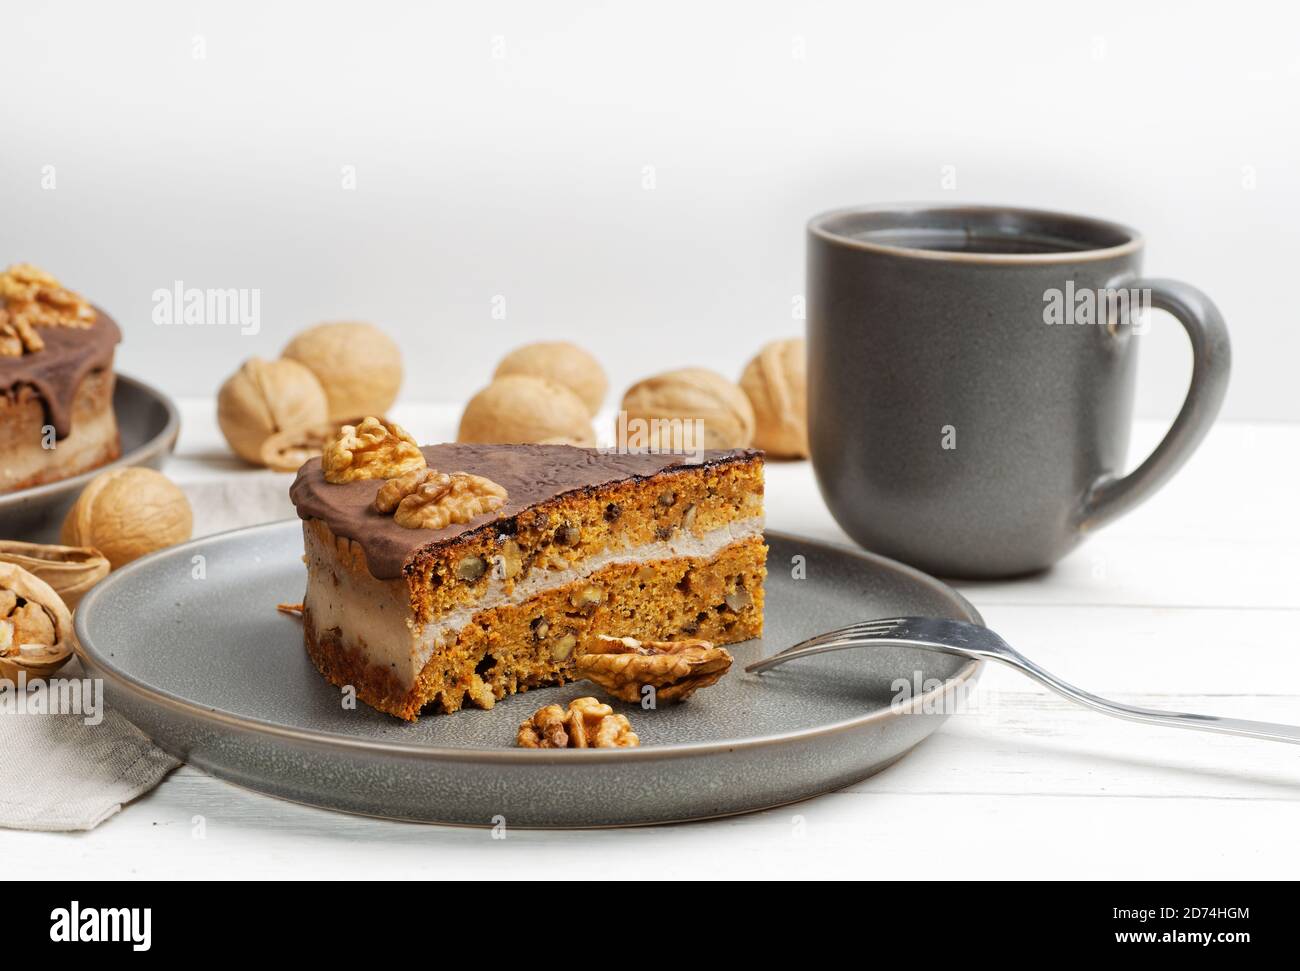 Piece of homemade walnut cake with chocolate icing and mug of tea on white wooden table. Shallow focus. Stock Photo